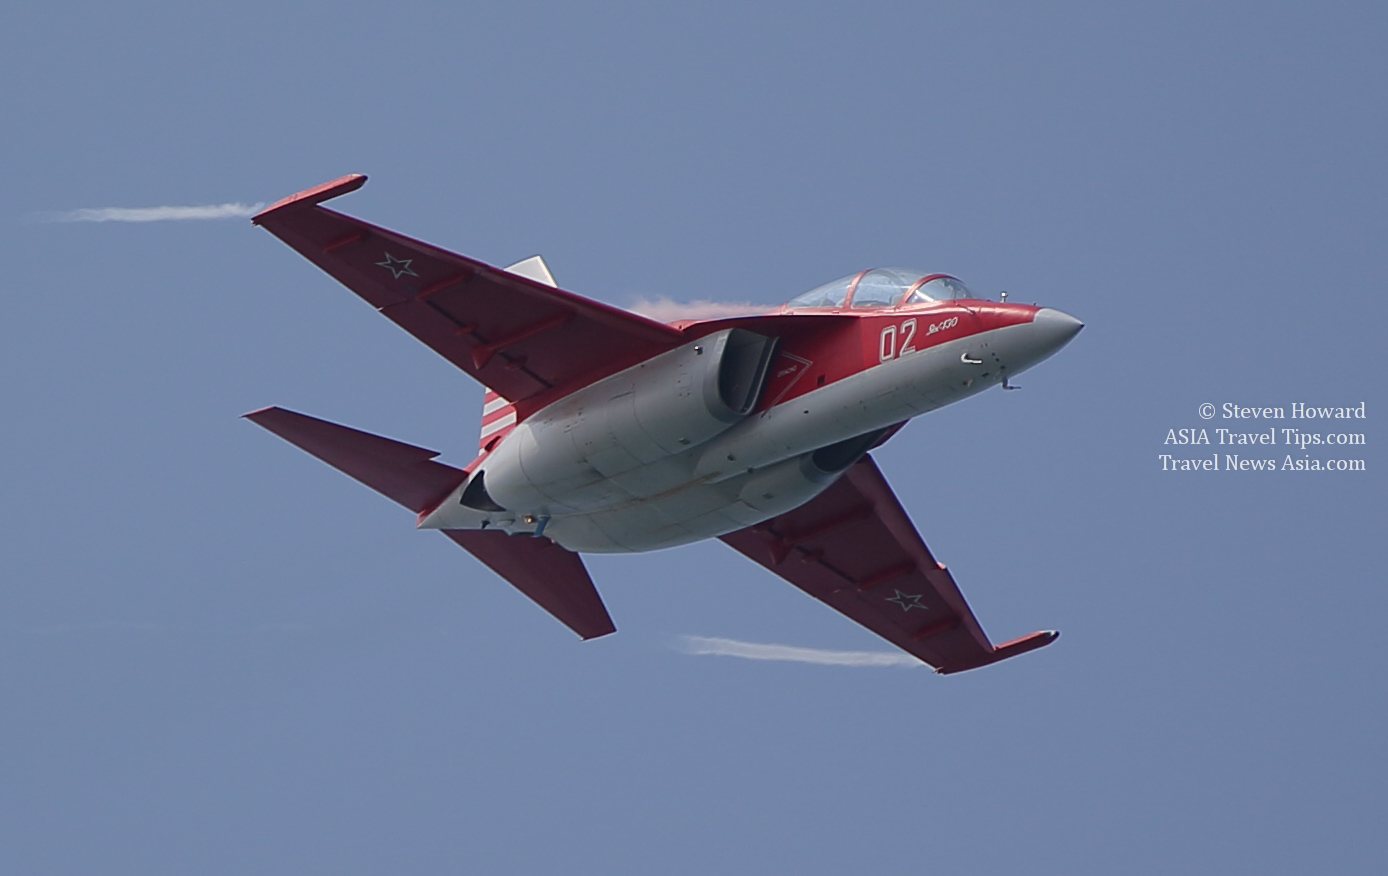 The lineup included aweinspiring team aerobatics performances by the 